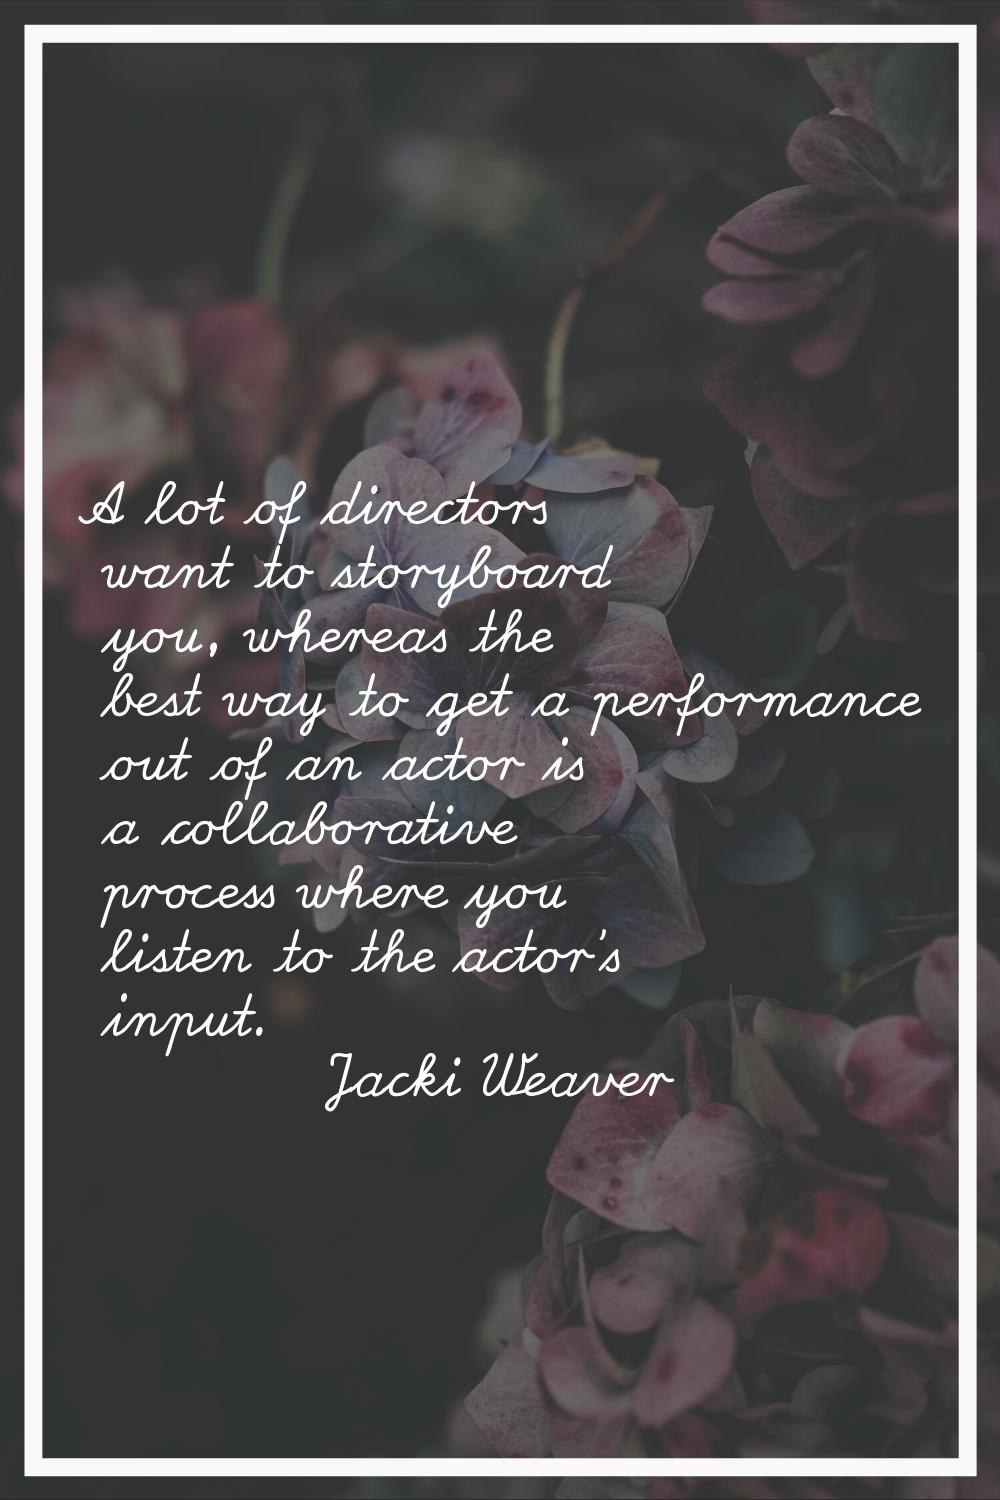 A lot of directors want to storyboard you, whereas the best way to get a performance out of an acto